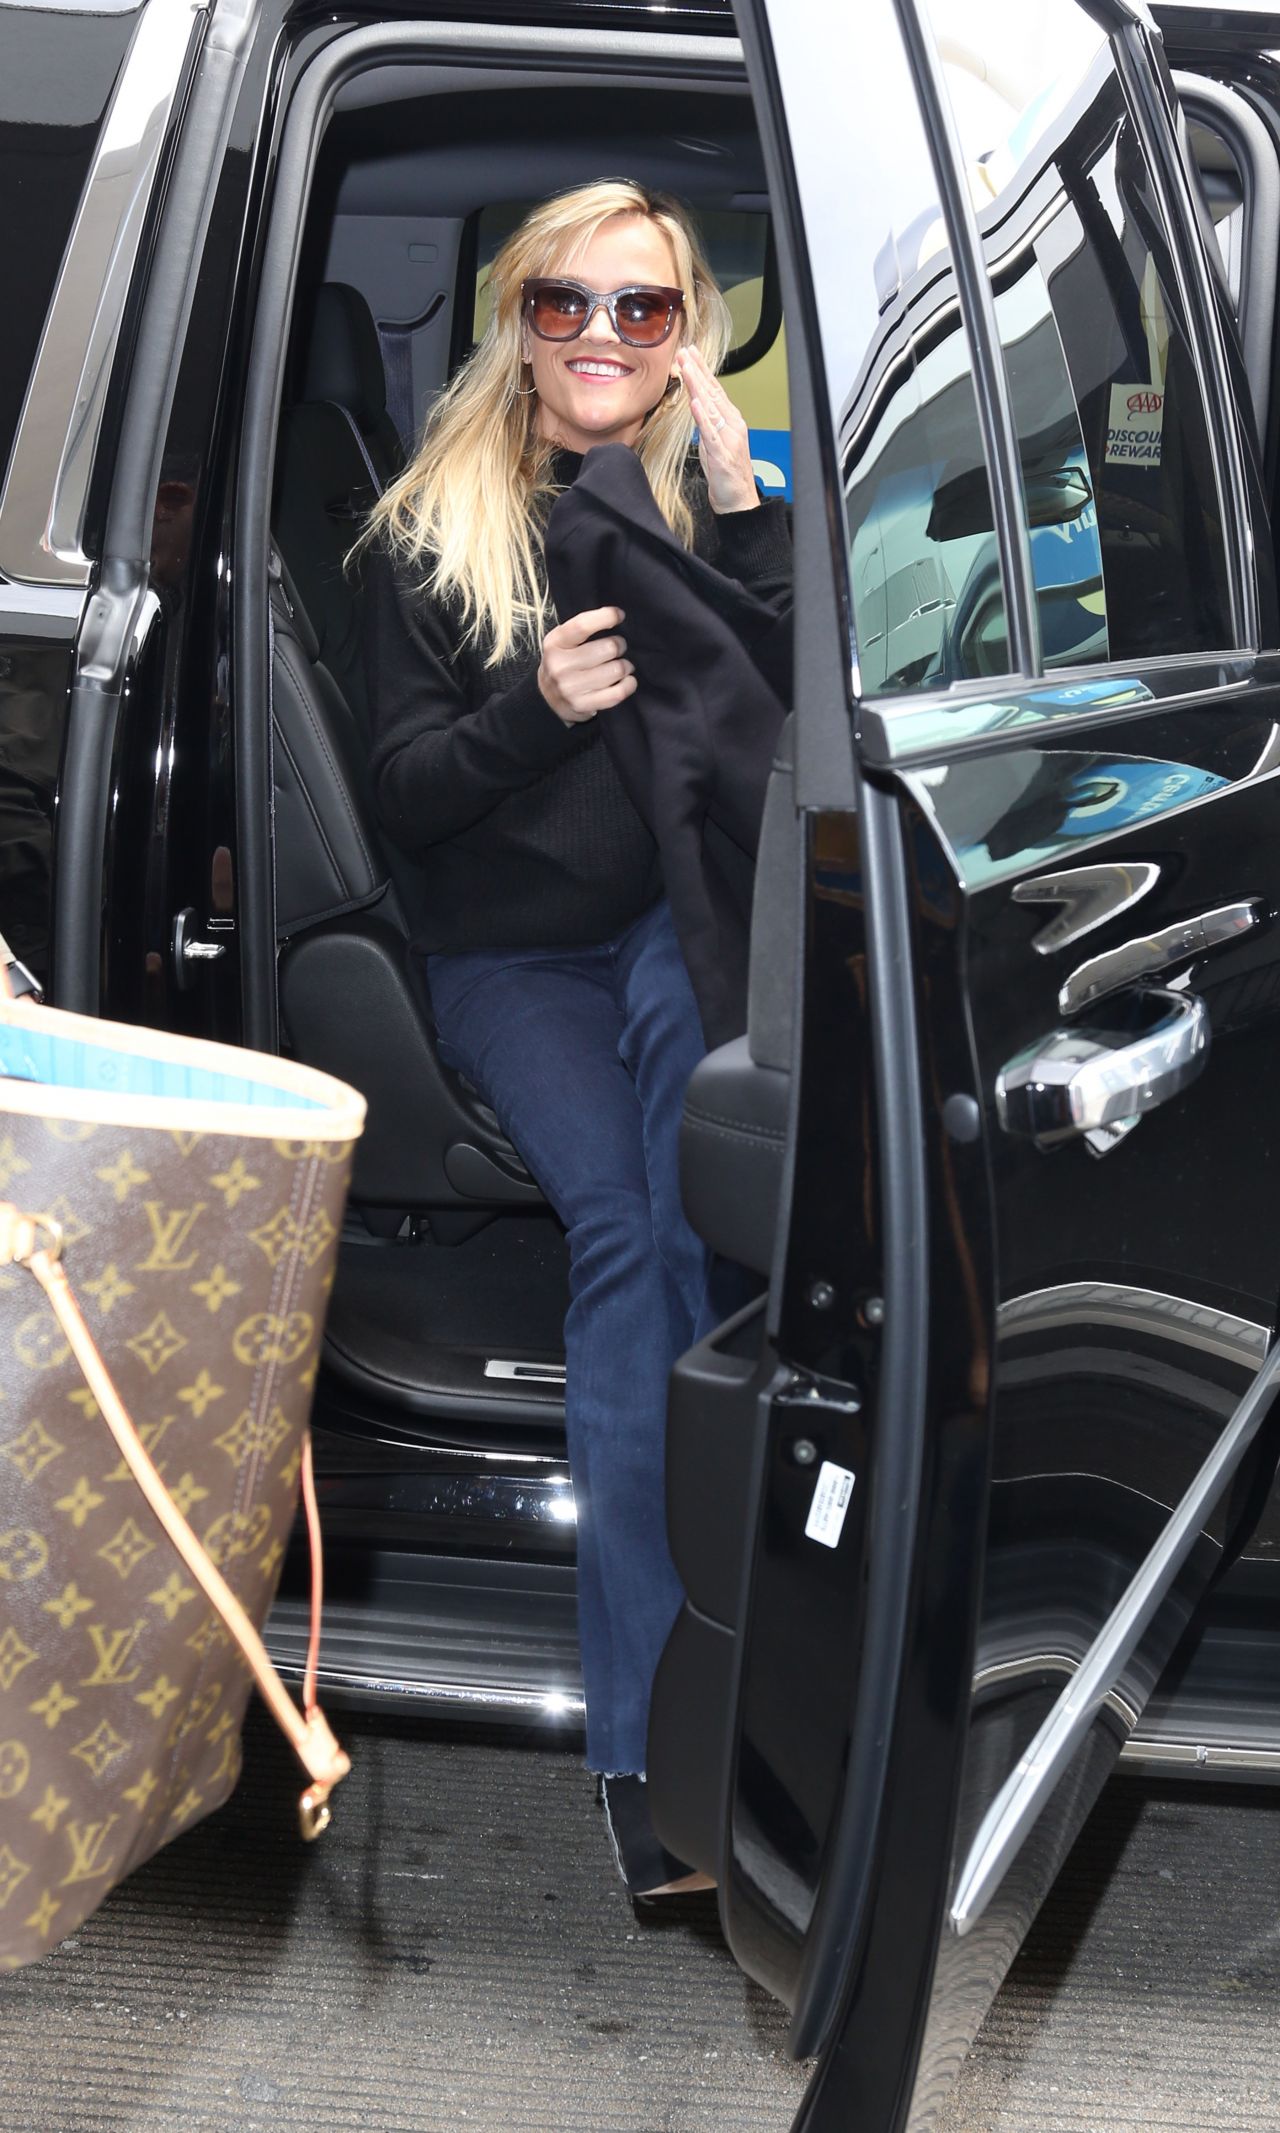 Reese Witherspoon LAX Airport September 16, 2013 – Star Style